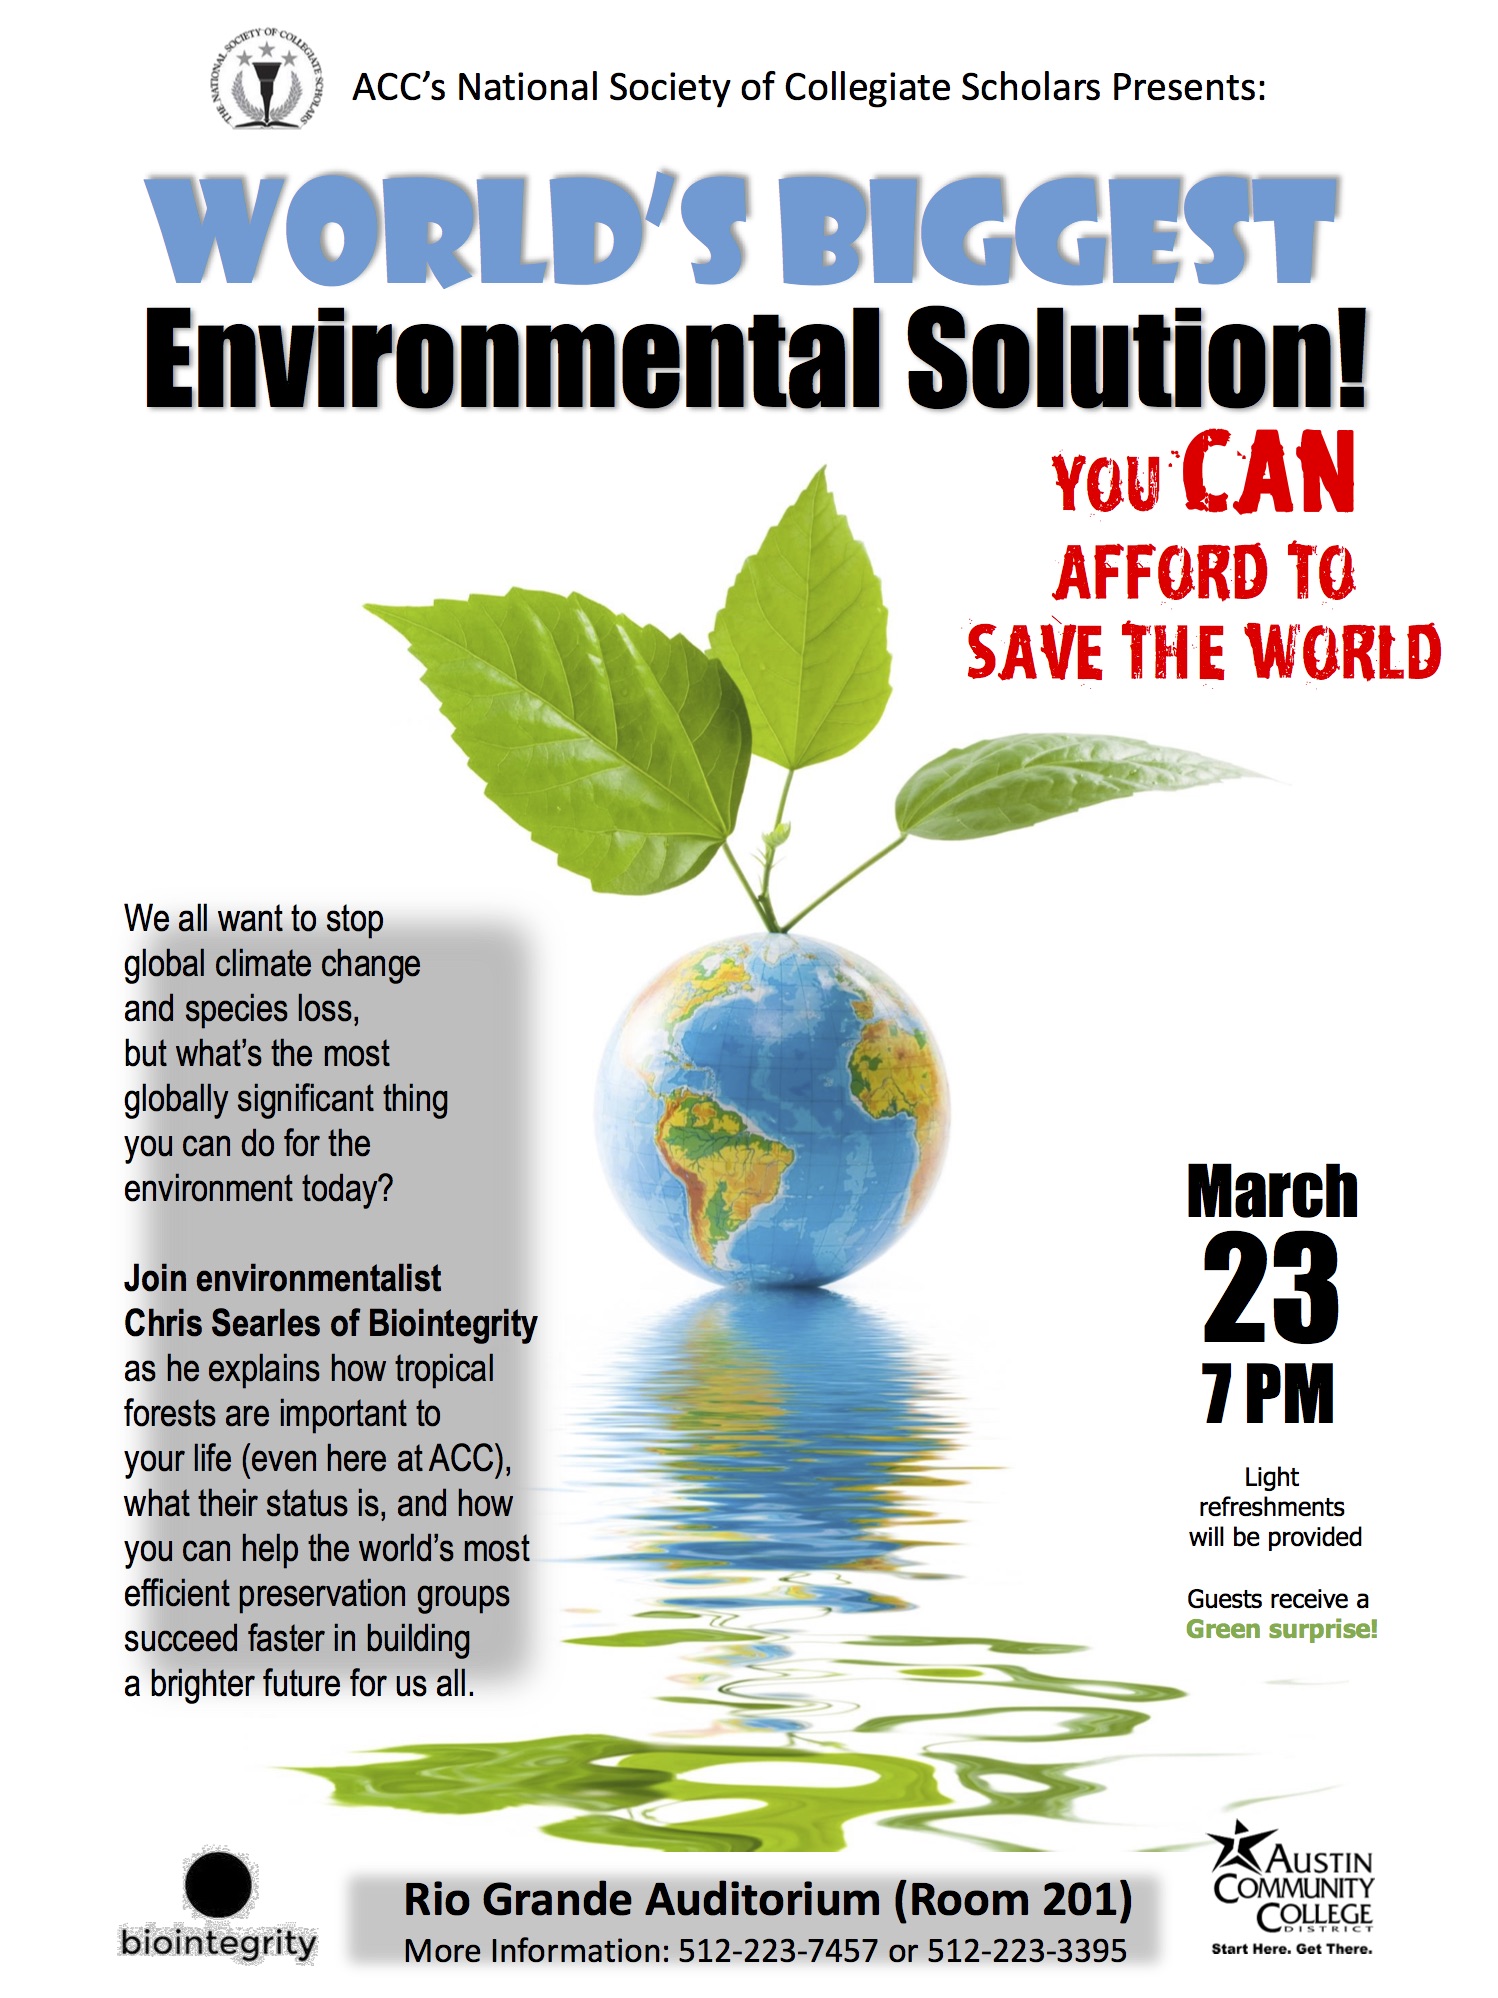 ACC hosts discussion on global environmental issues and solutions ACC